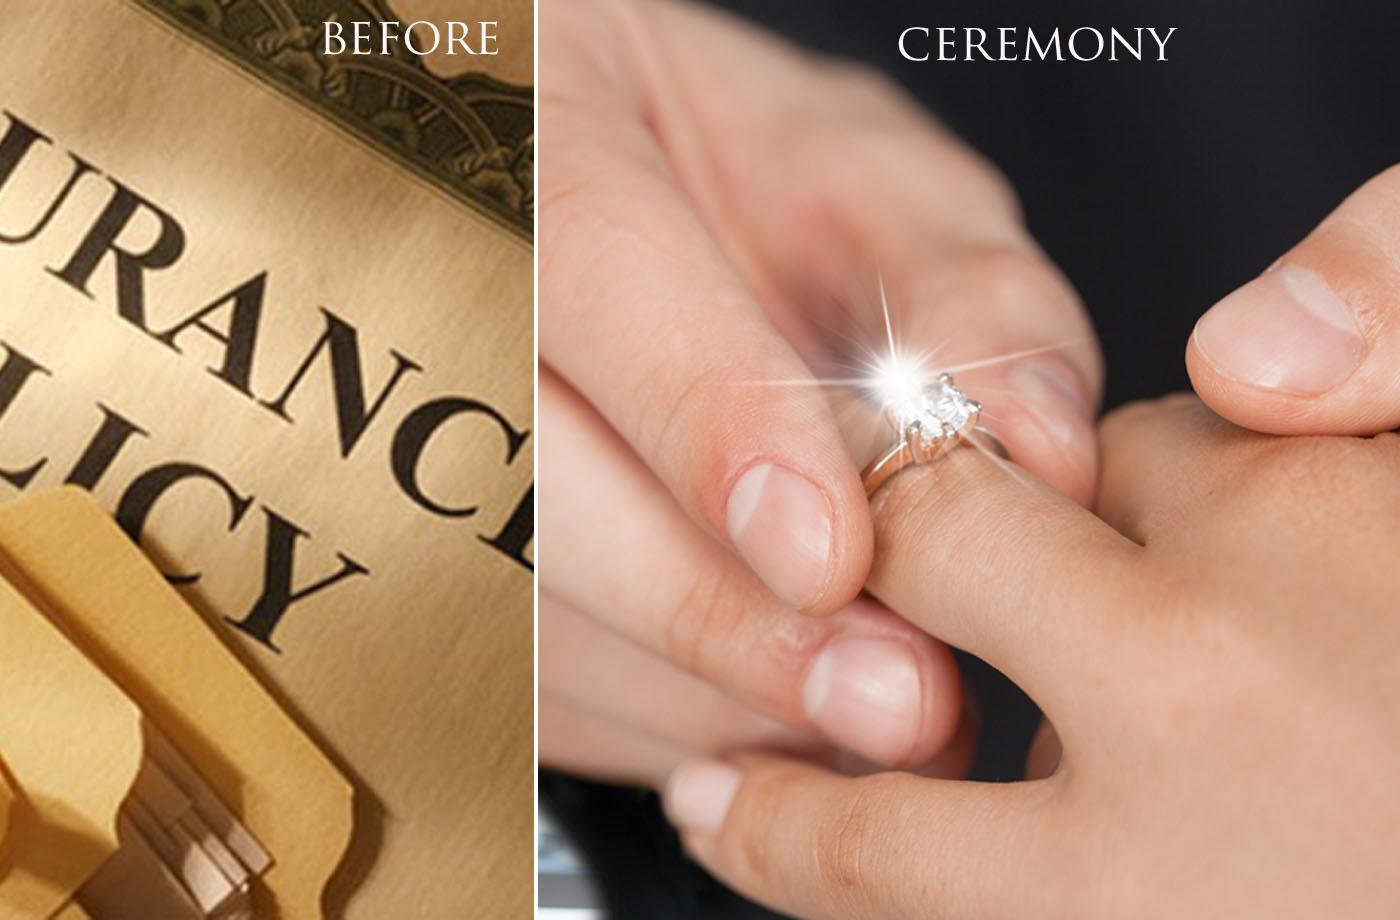 Rules For Engagement and Wedding Rings Ceremony | Oh So Perfect ...